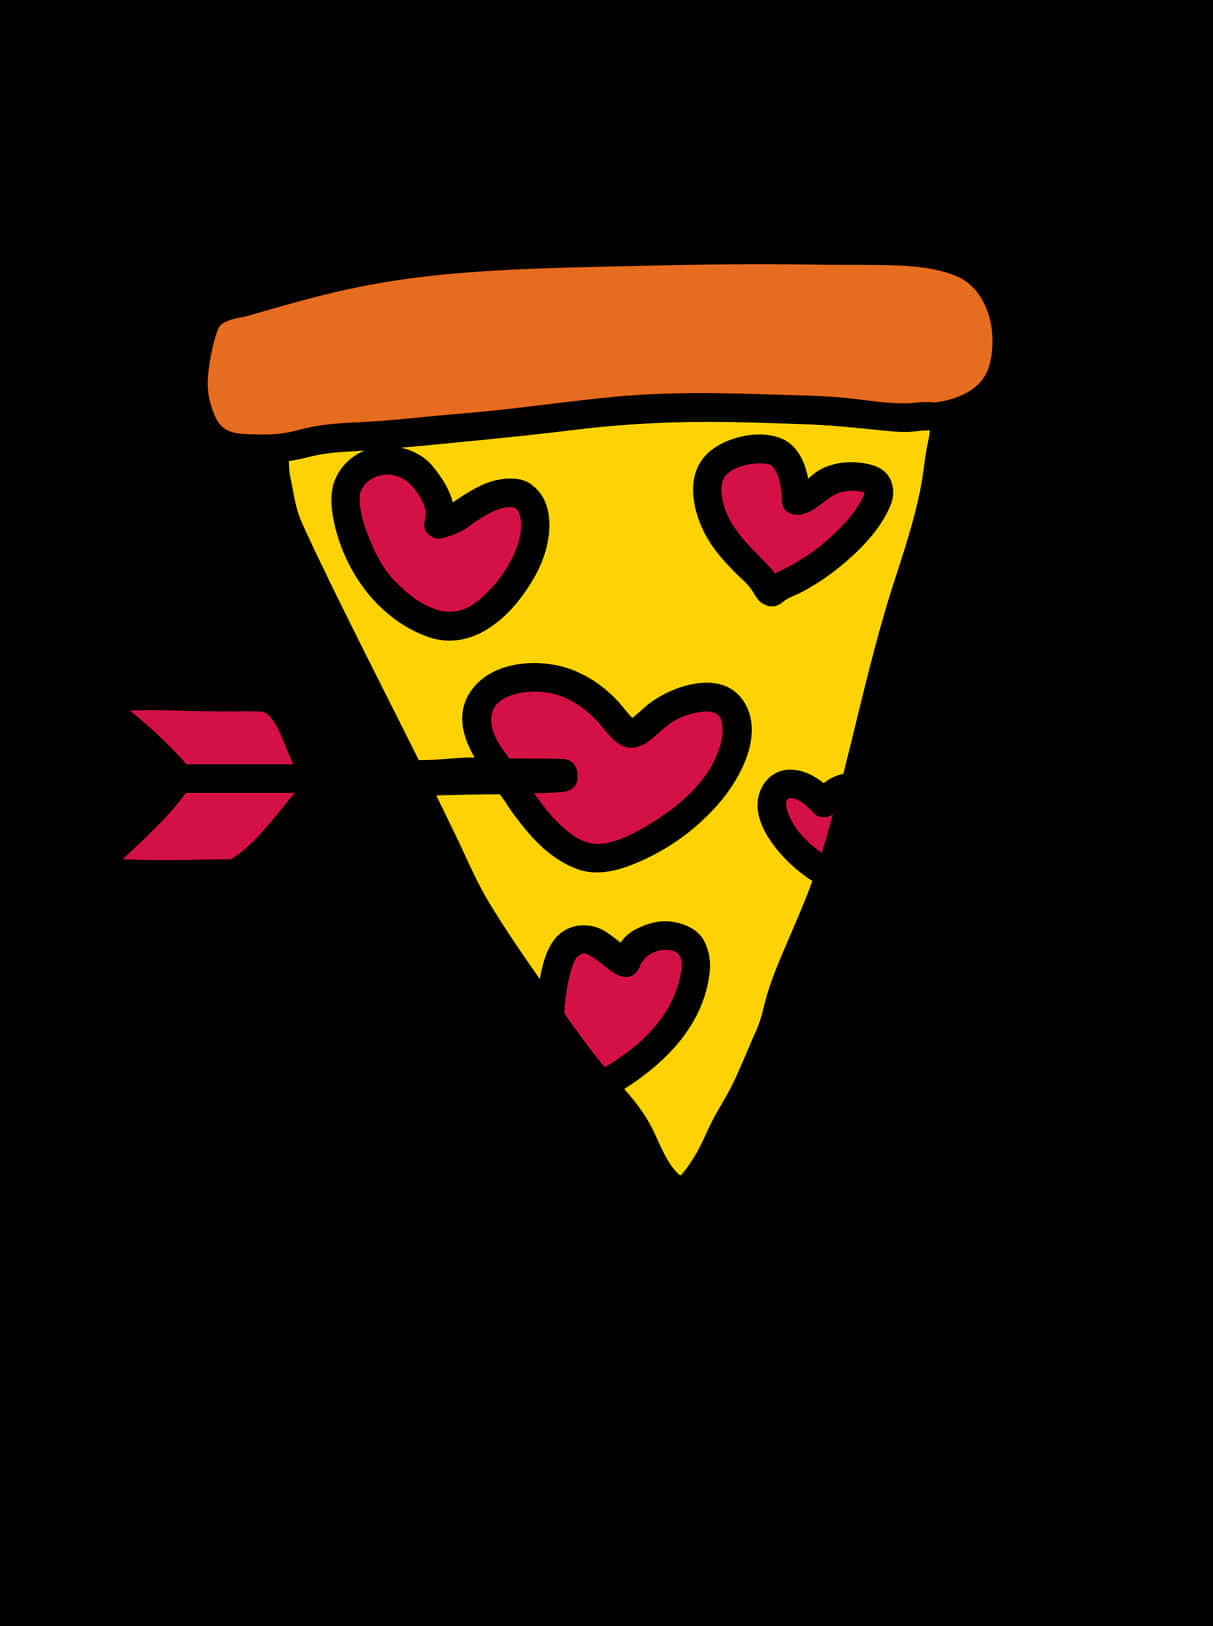 Love Pizza Slice Graphic PNG